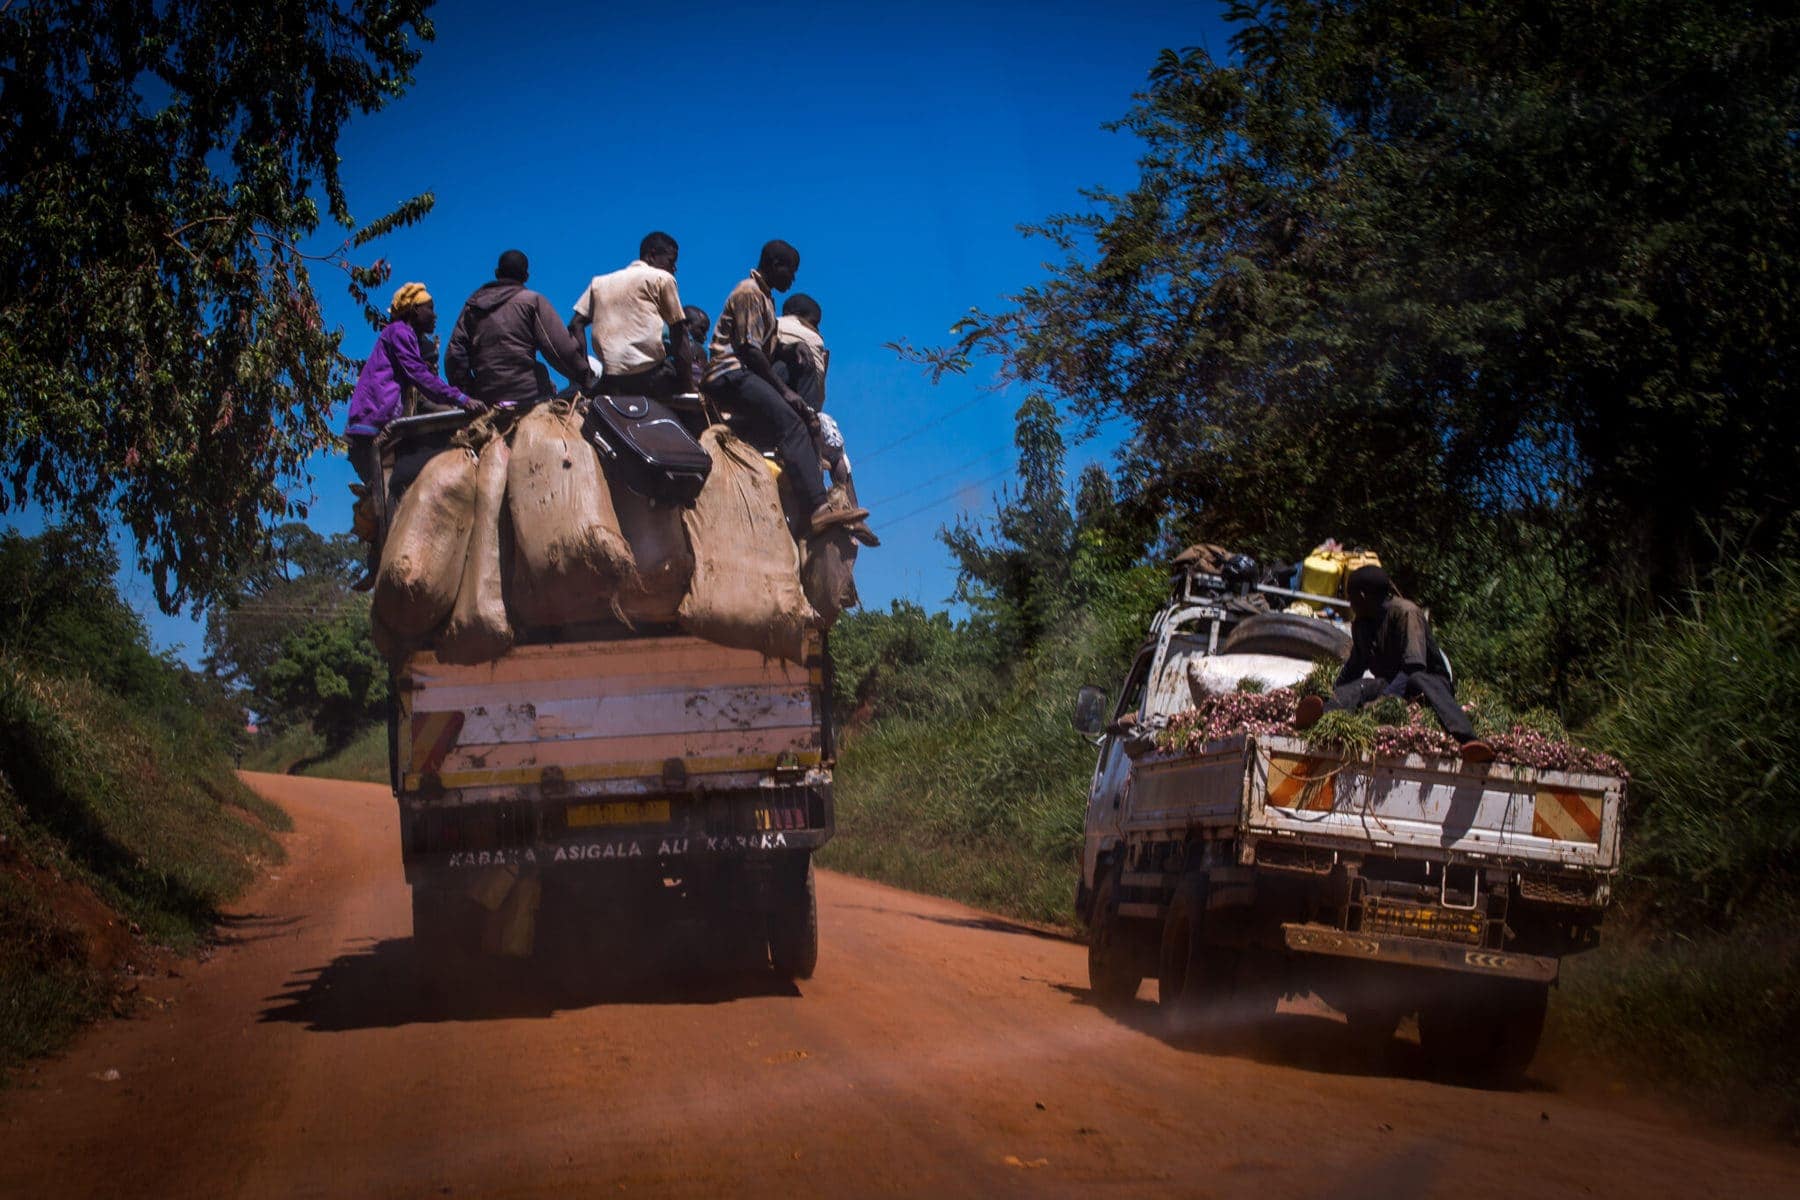 Traffic in Uganda is dangerous. In the picture, a crowded truck overtakes a smaller truck on a dirt narrow road